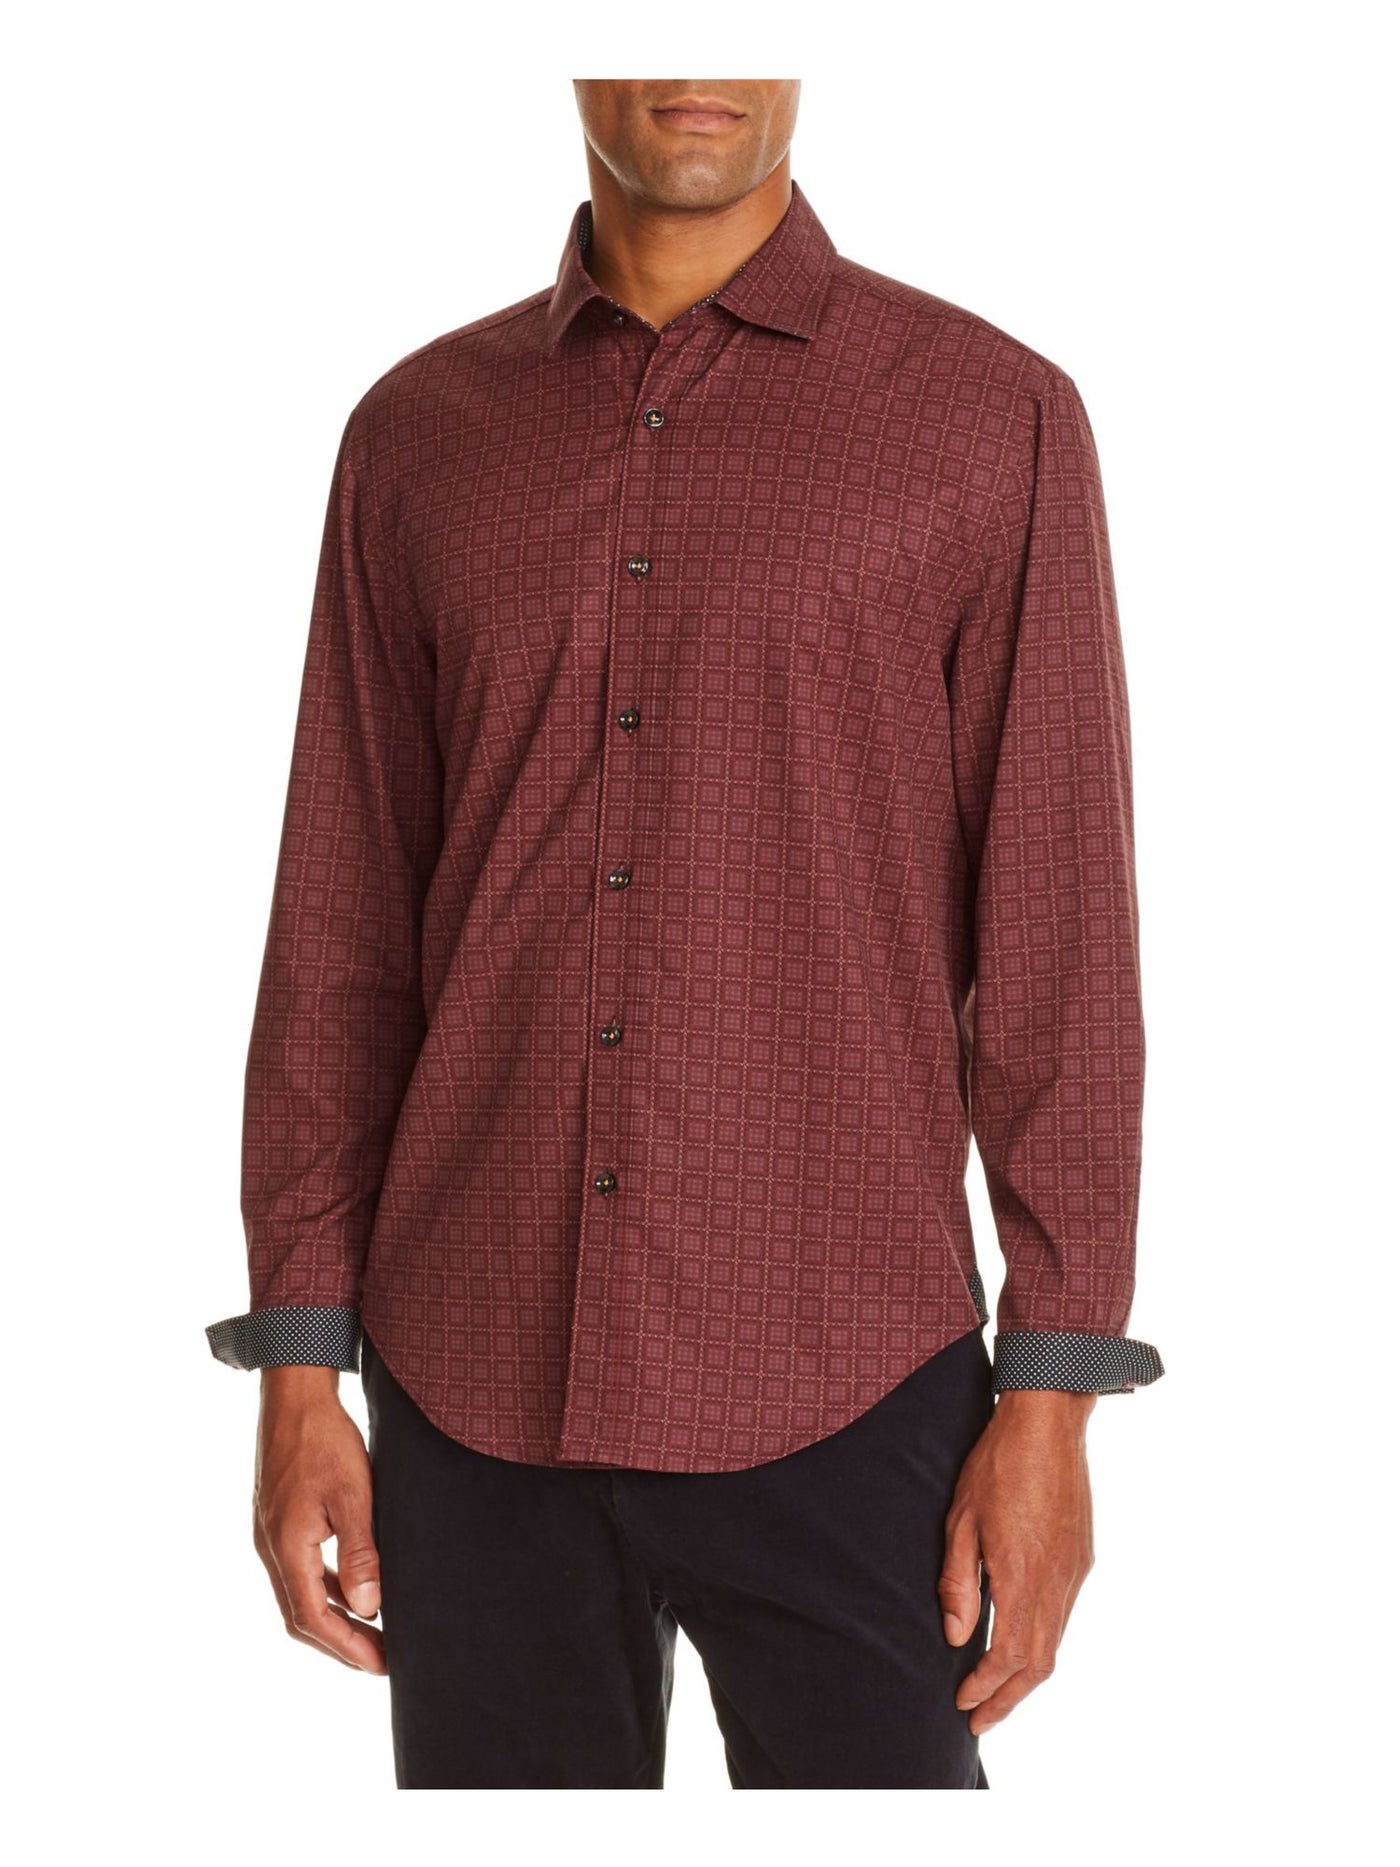 TALLIA SPORT Mens Red Patterned Button Down Stretch Casual Shirt S